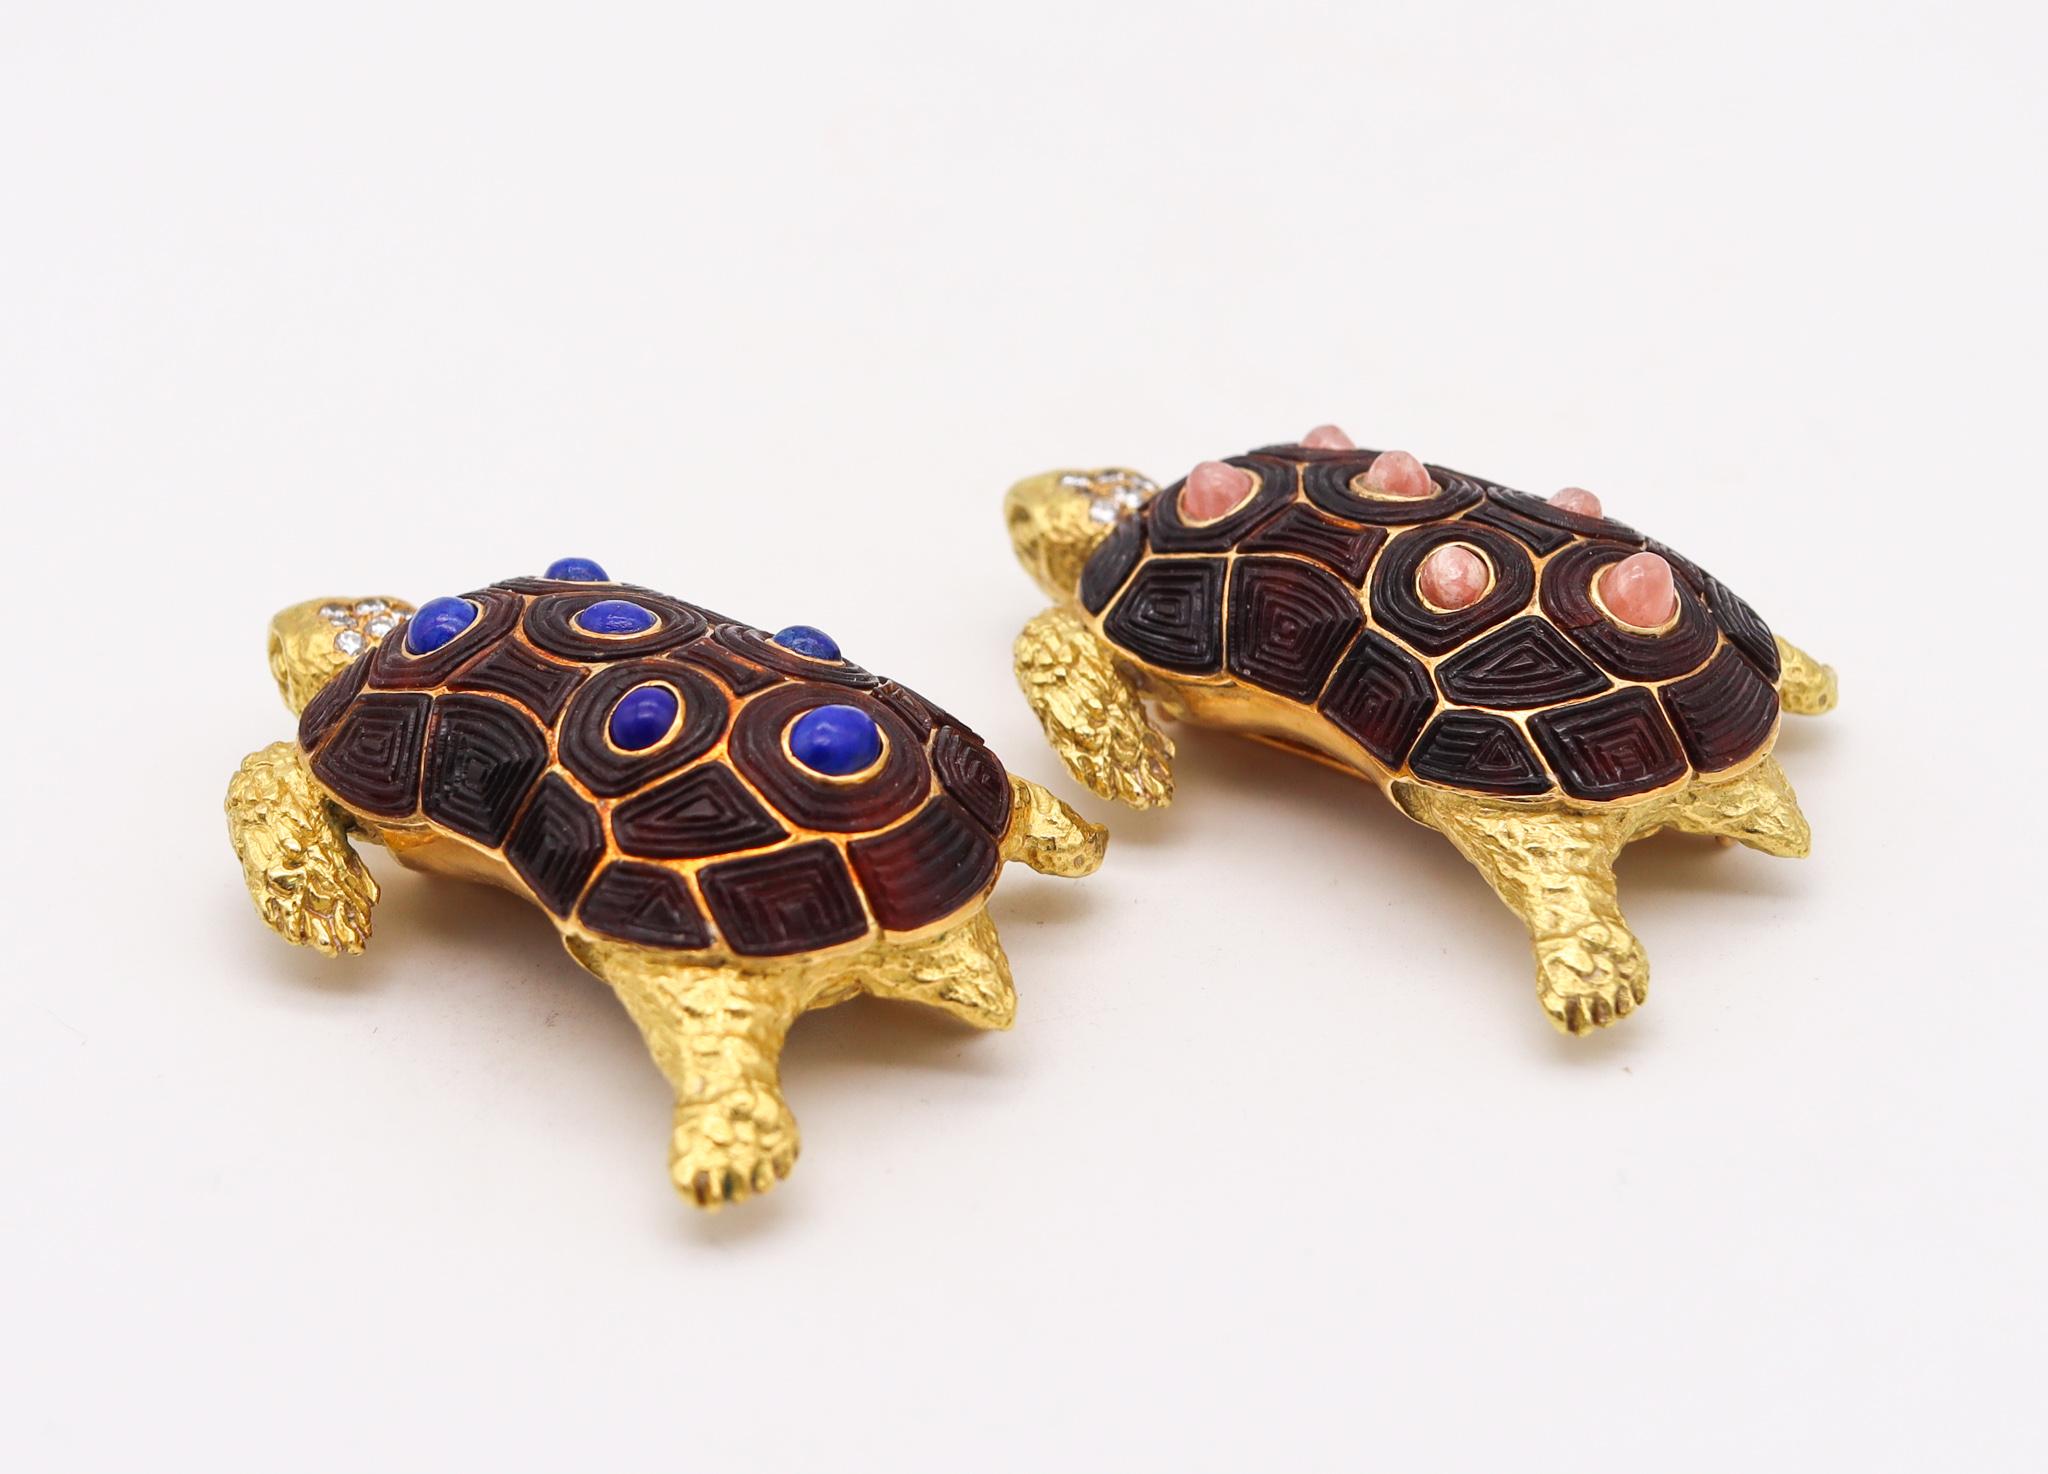 Cabochon Chaumet 1960 Paris Pair Of Turtles Brooches 18Kt Gold 13.82 Cts Diamonds & Gems For Sale